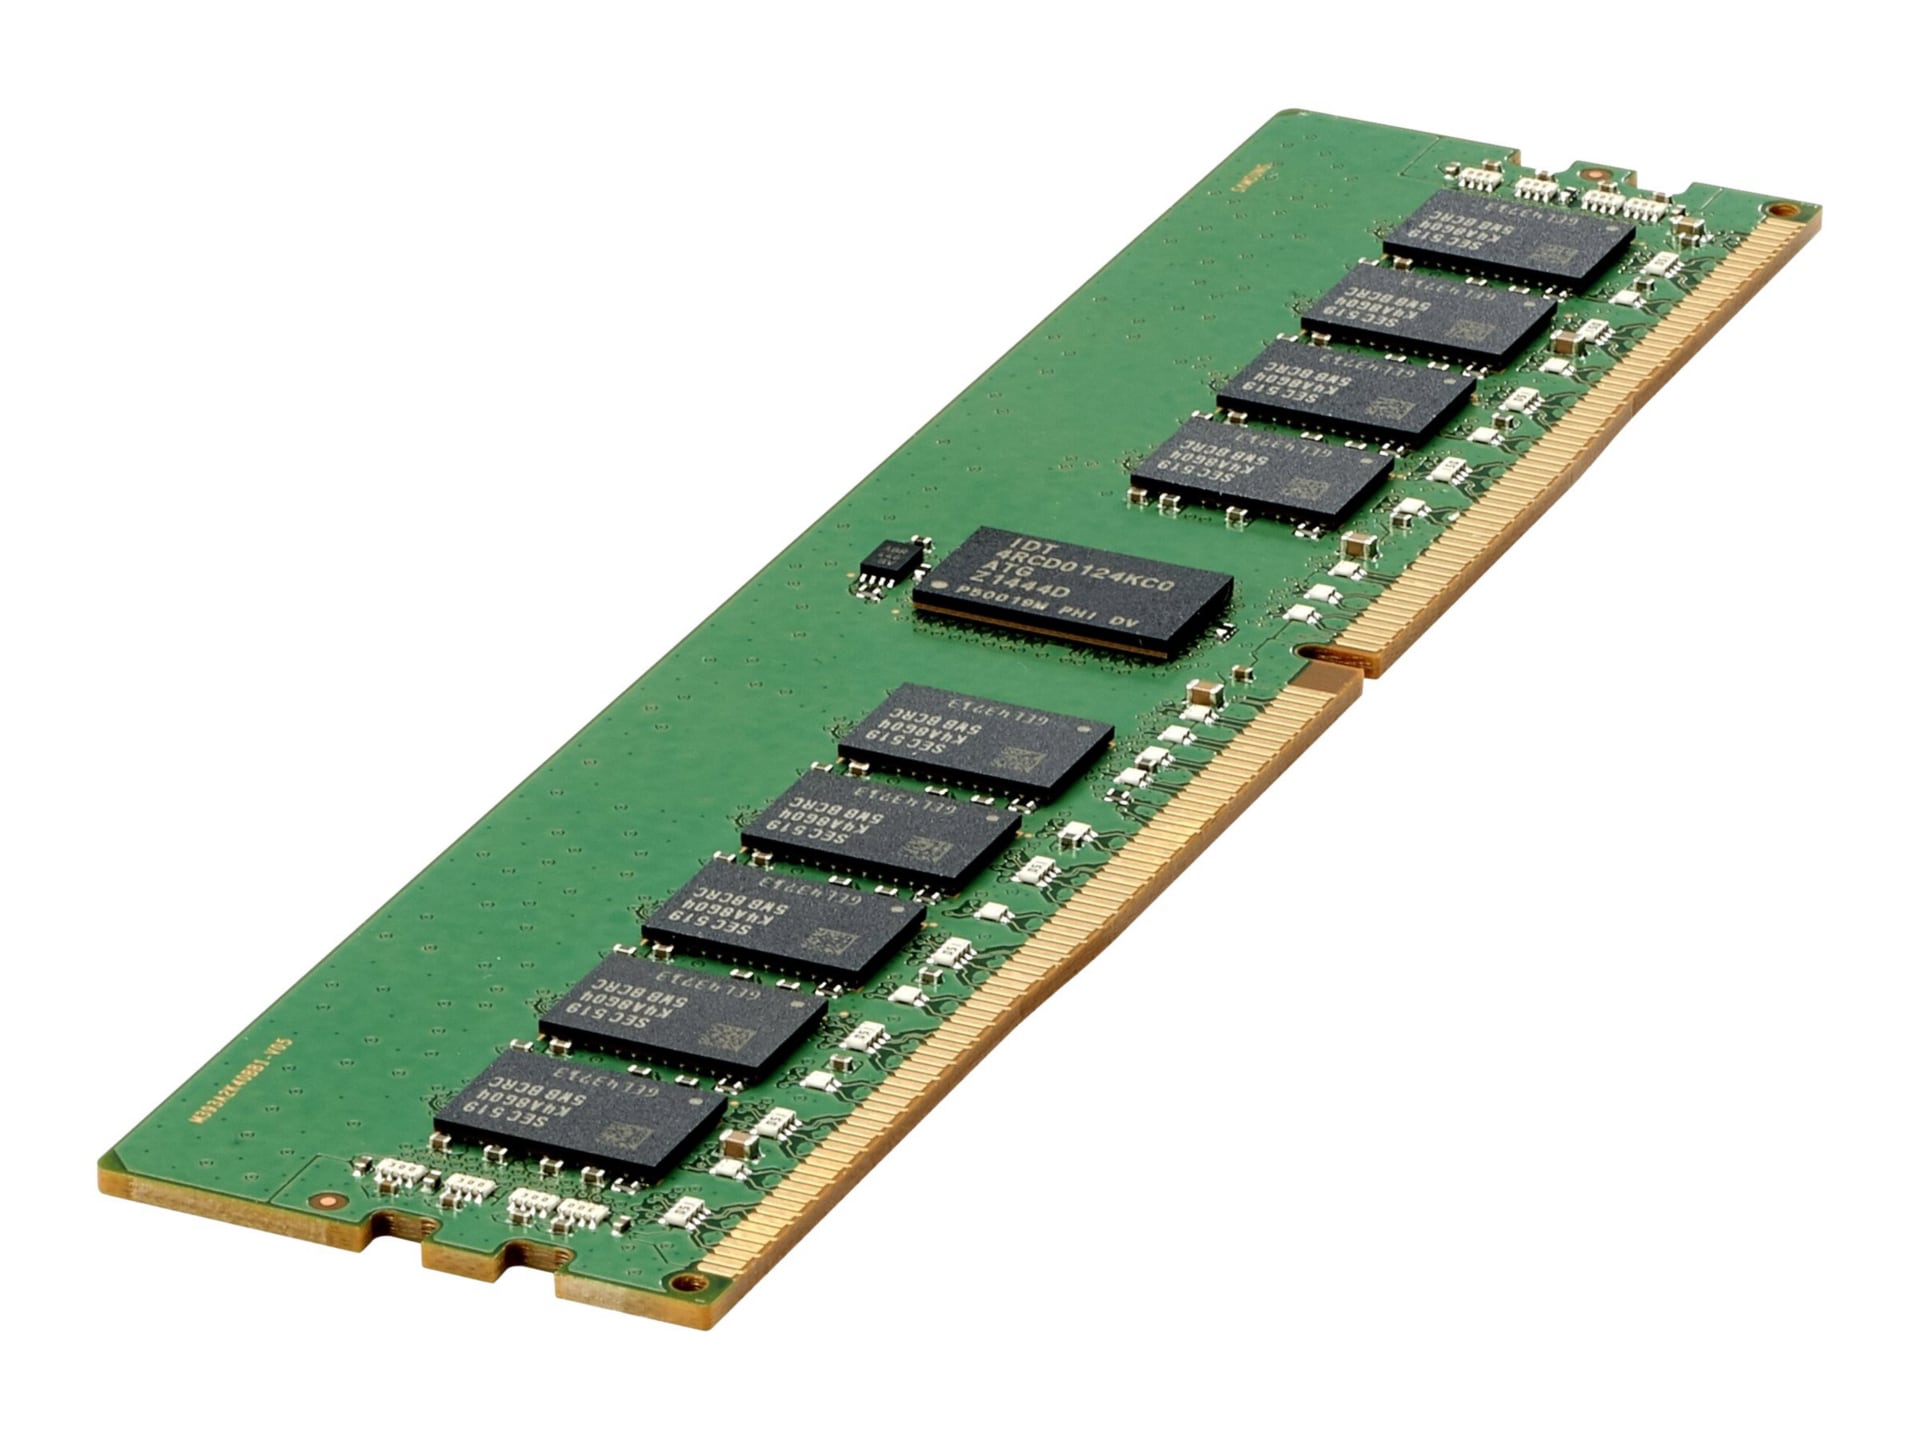 HPE SmartMemory - DDR4 - module - 256 GB - LRDIMM 288-pin - 3200 MHz / PC4-25600 - 3DS Load-Reduced